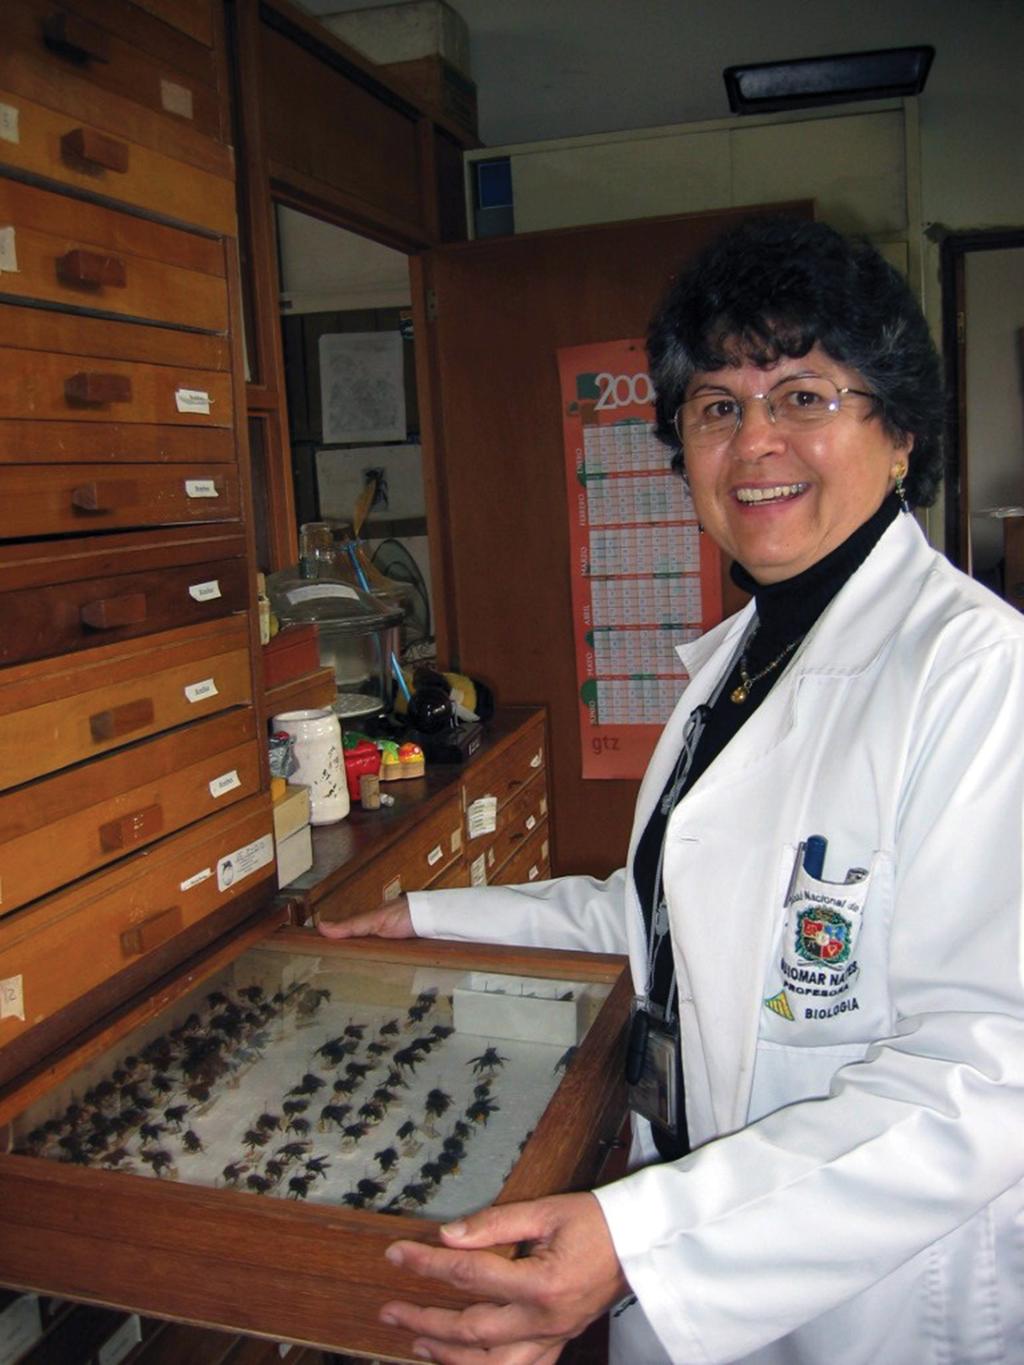 2013 Gonzalez & Engel: Nates-Parra & Colombian melittology 3 Figure 1. Professor M. Guiomar Nates-Parra in 2006 showing a collection of orchid bees in her lab (Photograph courtesy of M.L.